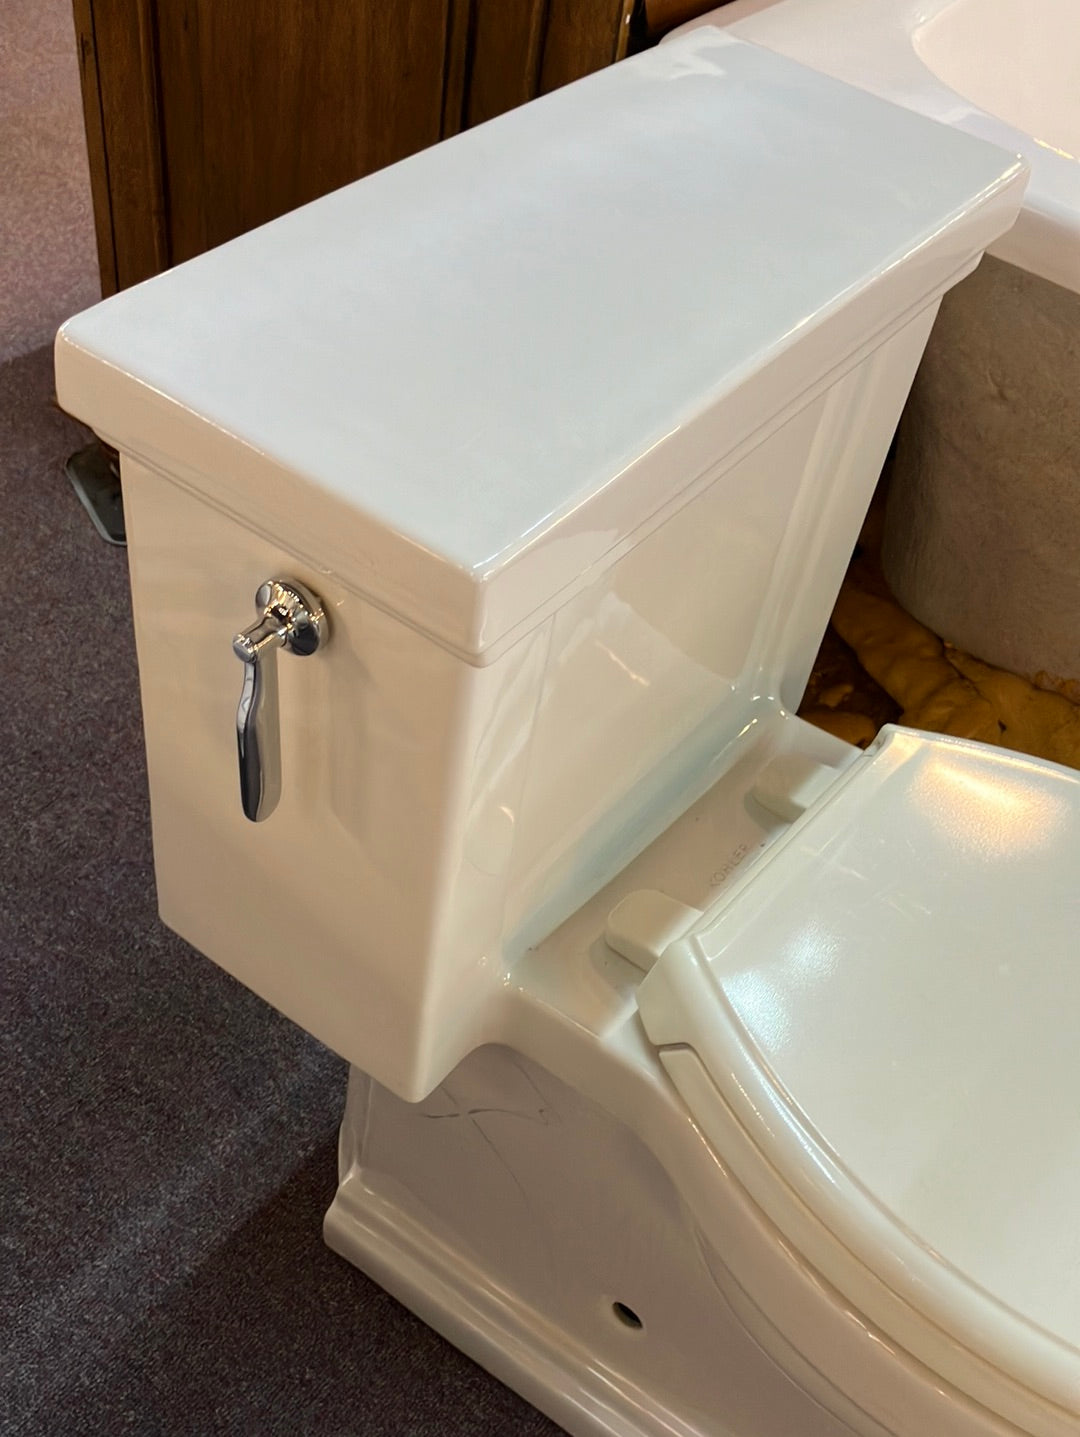 KOHLER K-3619-96 Toilet, Biscuit Seat has some scuff marks on the top